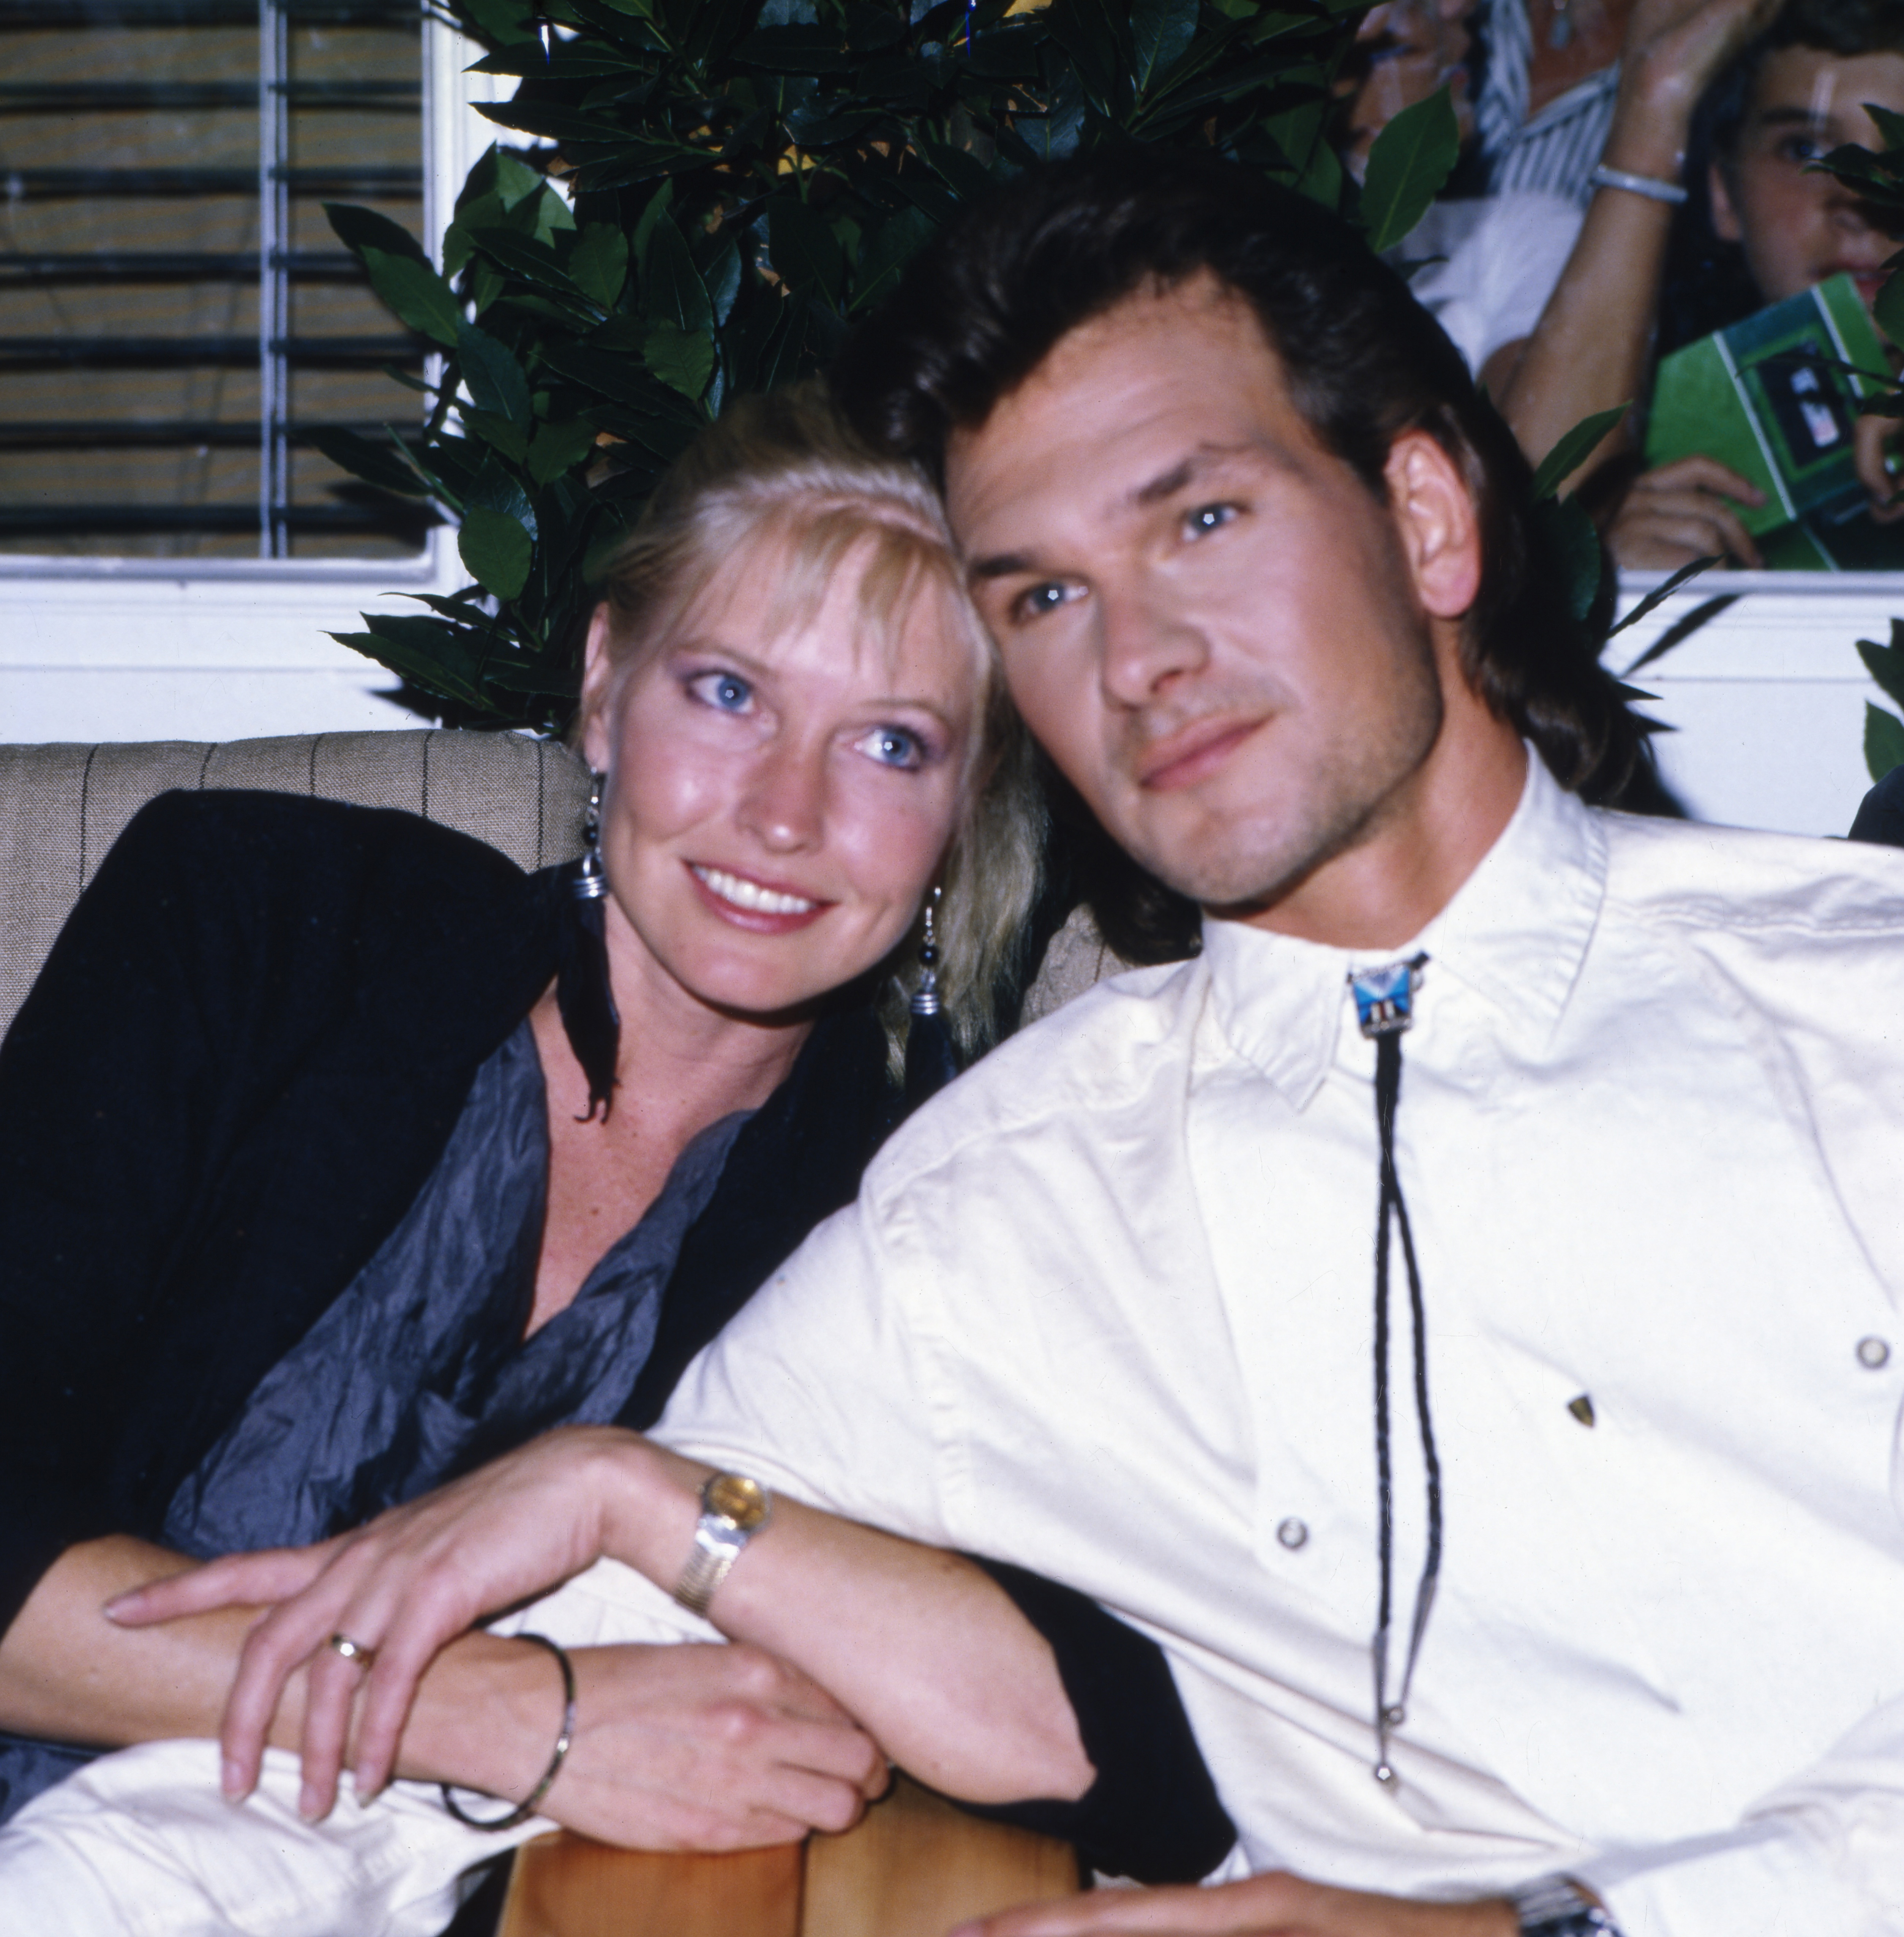 Patrick Swayze and his wife Lisa Niemi photographed in 1985 | Source: Getty Images 